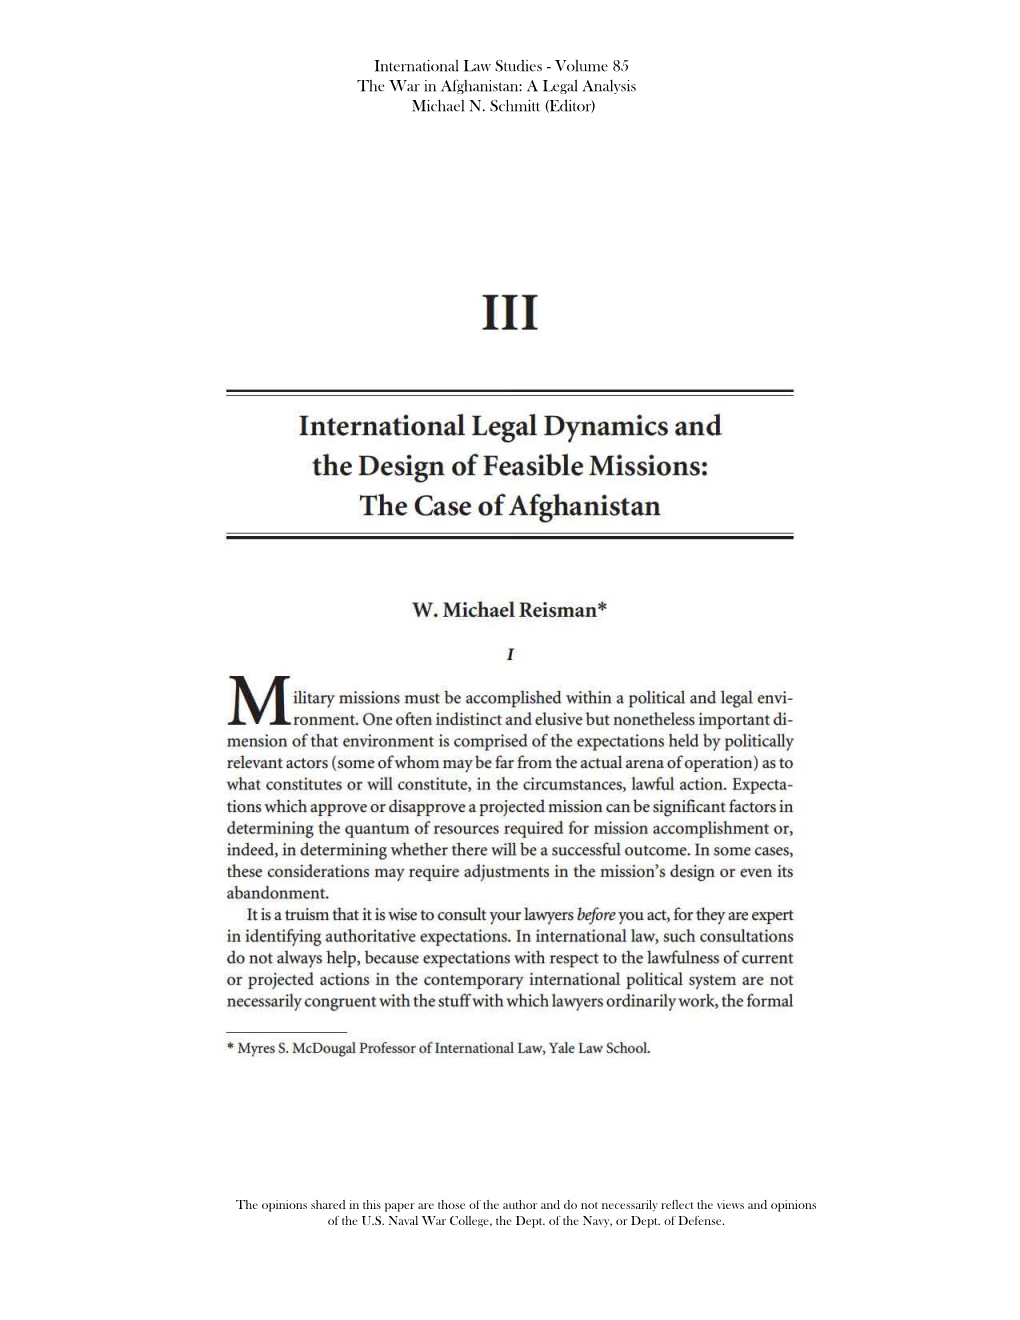 International Legal Dynamics and the Design of Feasible Missions: the Case of Afghanistan